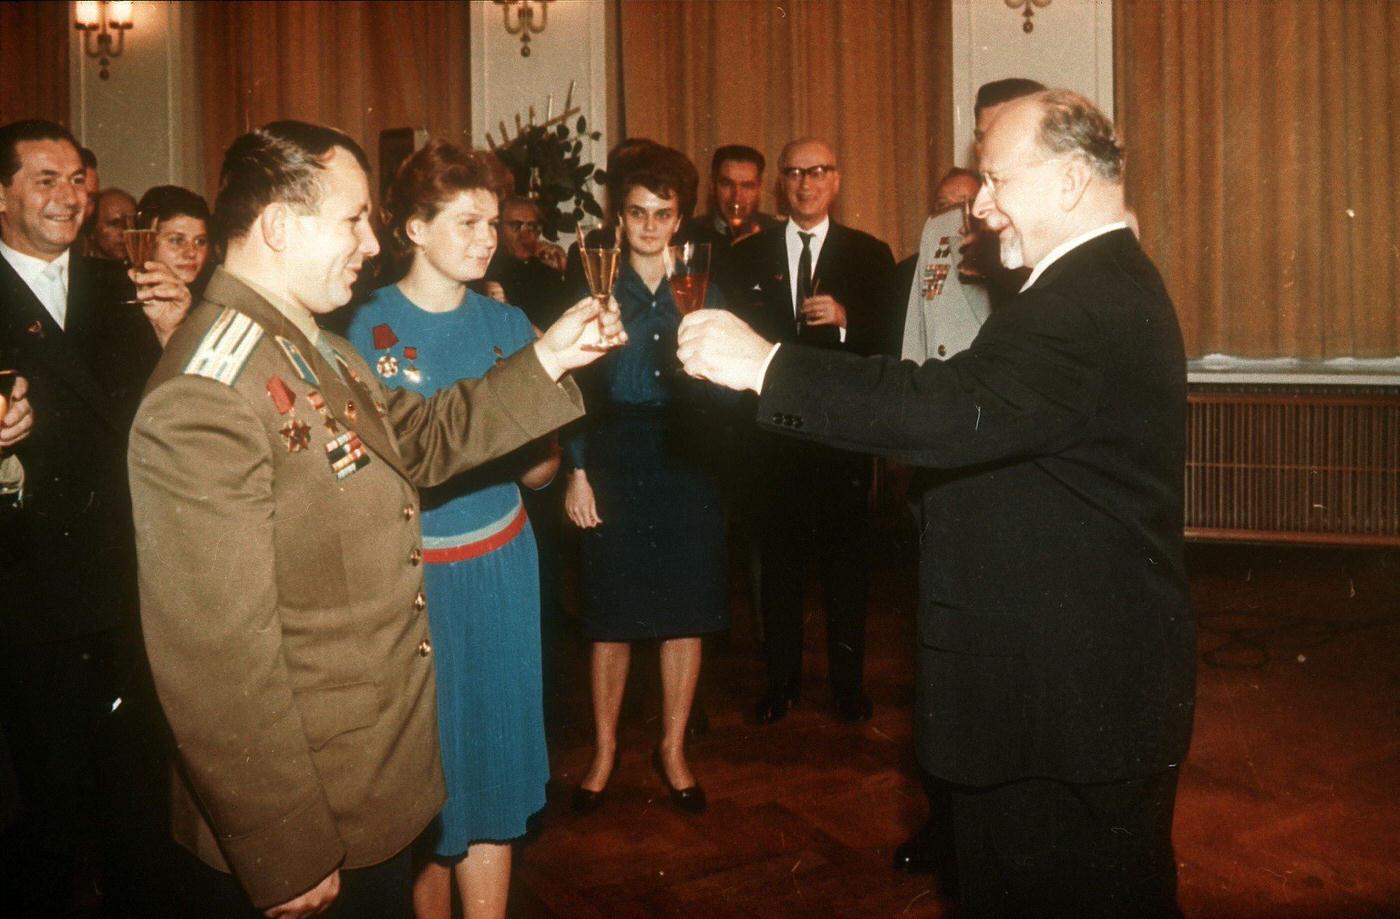 Walter Ulbricht, First Secretary of the Central Committee of the Socialist Unity Party of Germany, clinks glasses with Yuri Gagarin and Valentina Tereshkova (cosmonauts) during a reception, 1963.